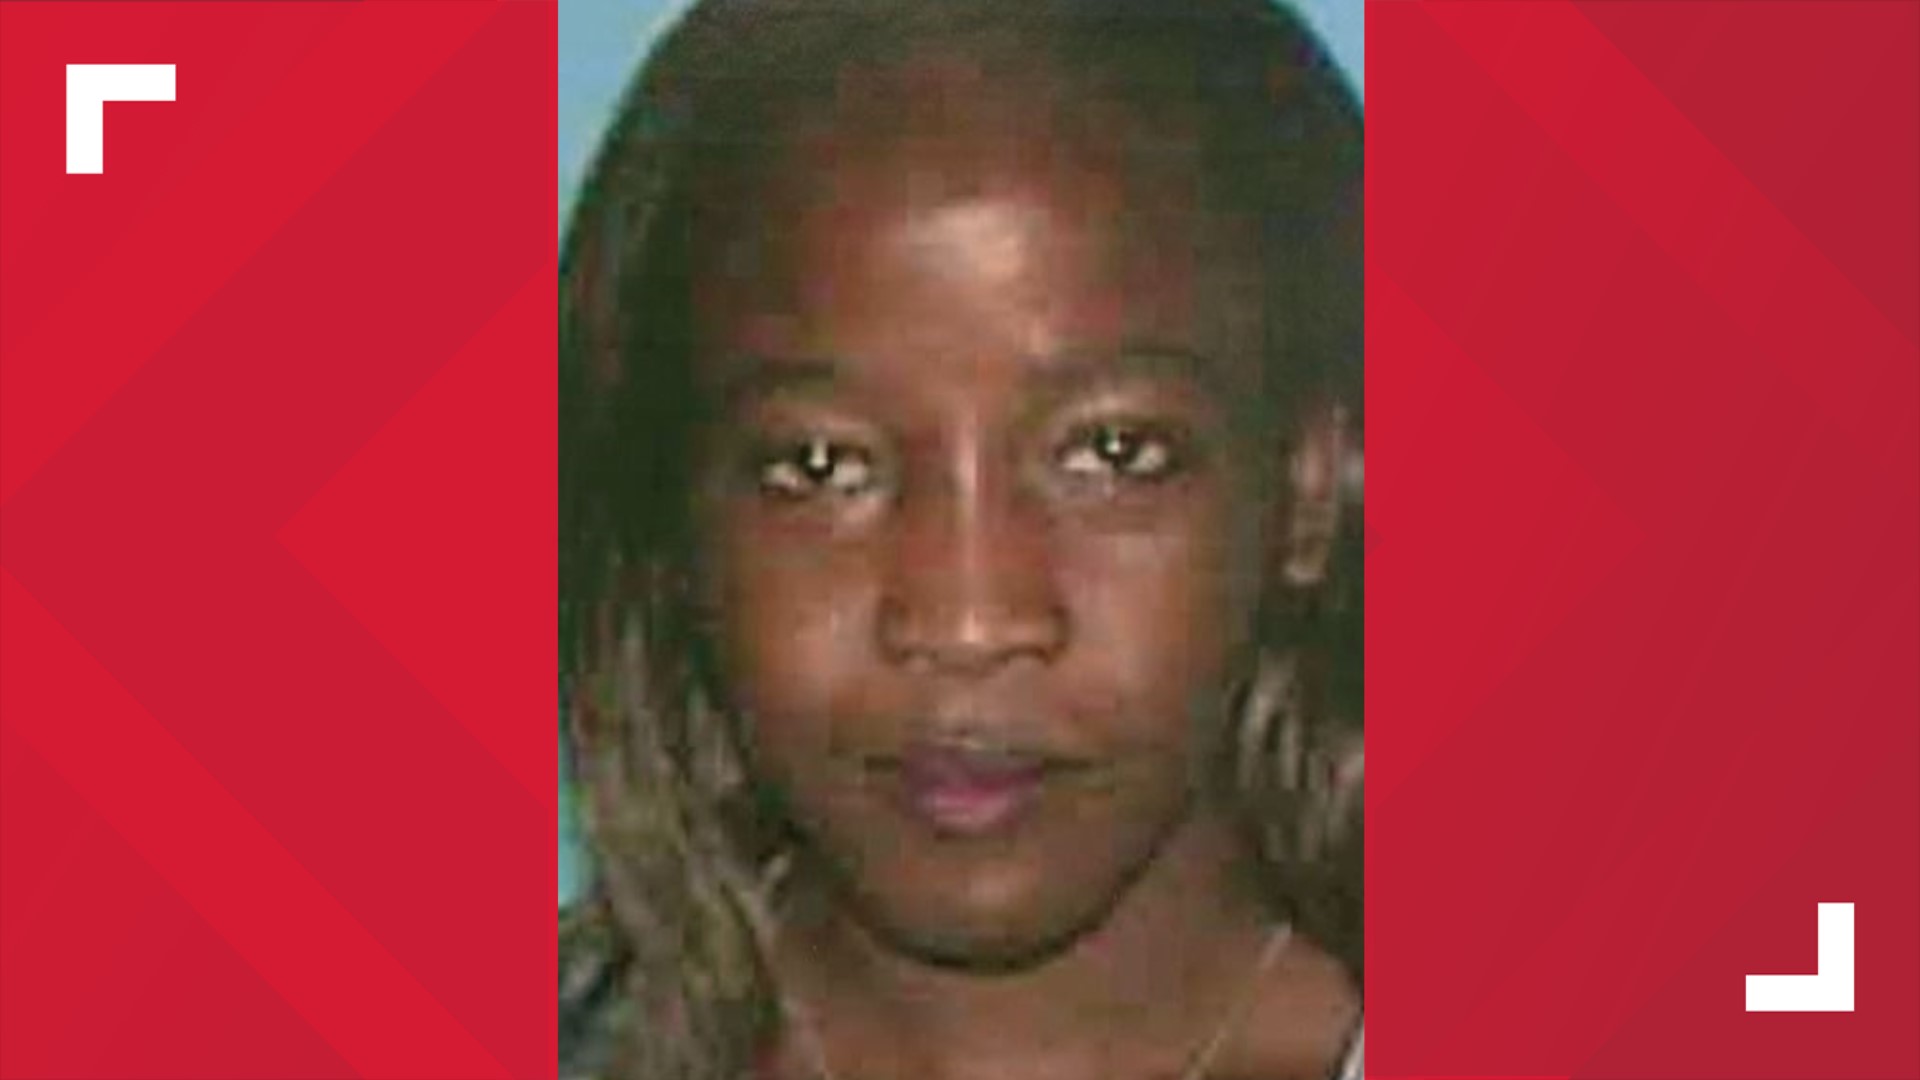 Teresa Ann Black, previously Teresa Ann Bailey, was found guilty in the Charlotte area of manslaughter and served one year in prison from 1994-1995.